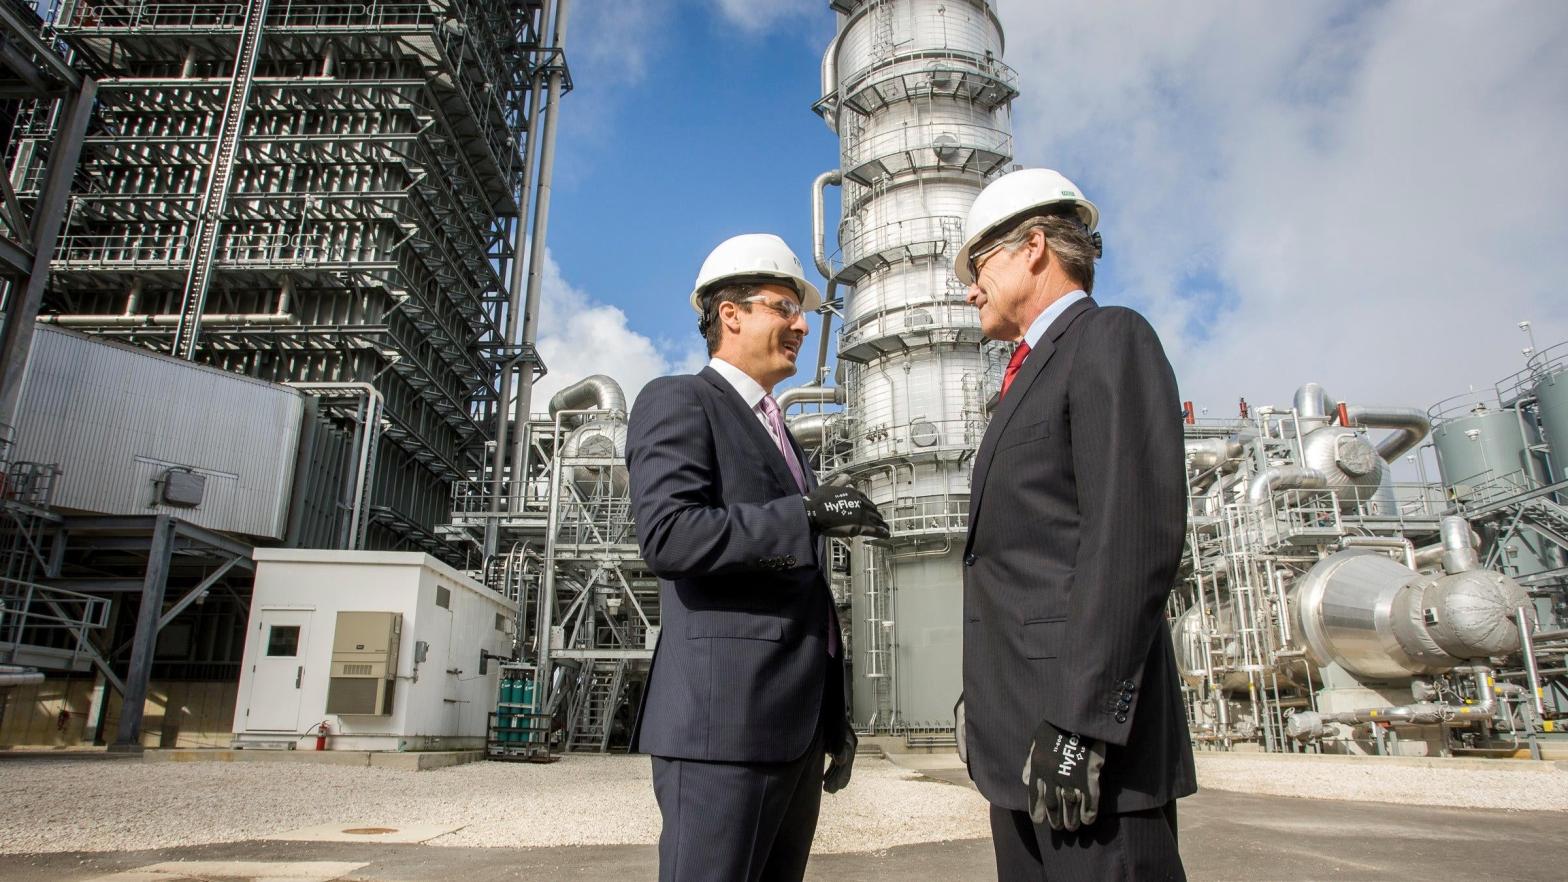 Then-Secretary of Energy Rick Perry (right) joins NRG Energy CEO Mauricio Gutierrez (left) on a tour of the Petra Nova carbon capture and enhanced oil recovery system on Thursday, April 13, 2017. The plant closed less than four years after this photo was taken. (Photo: Paul Ladd, AP)